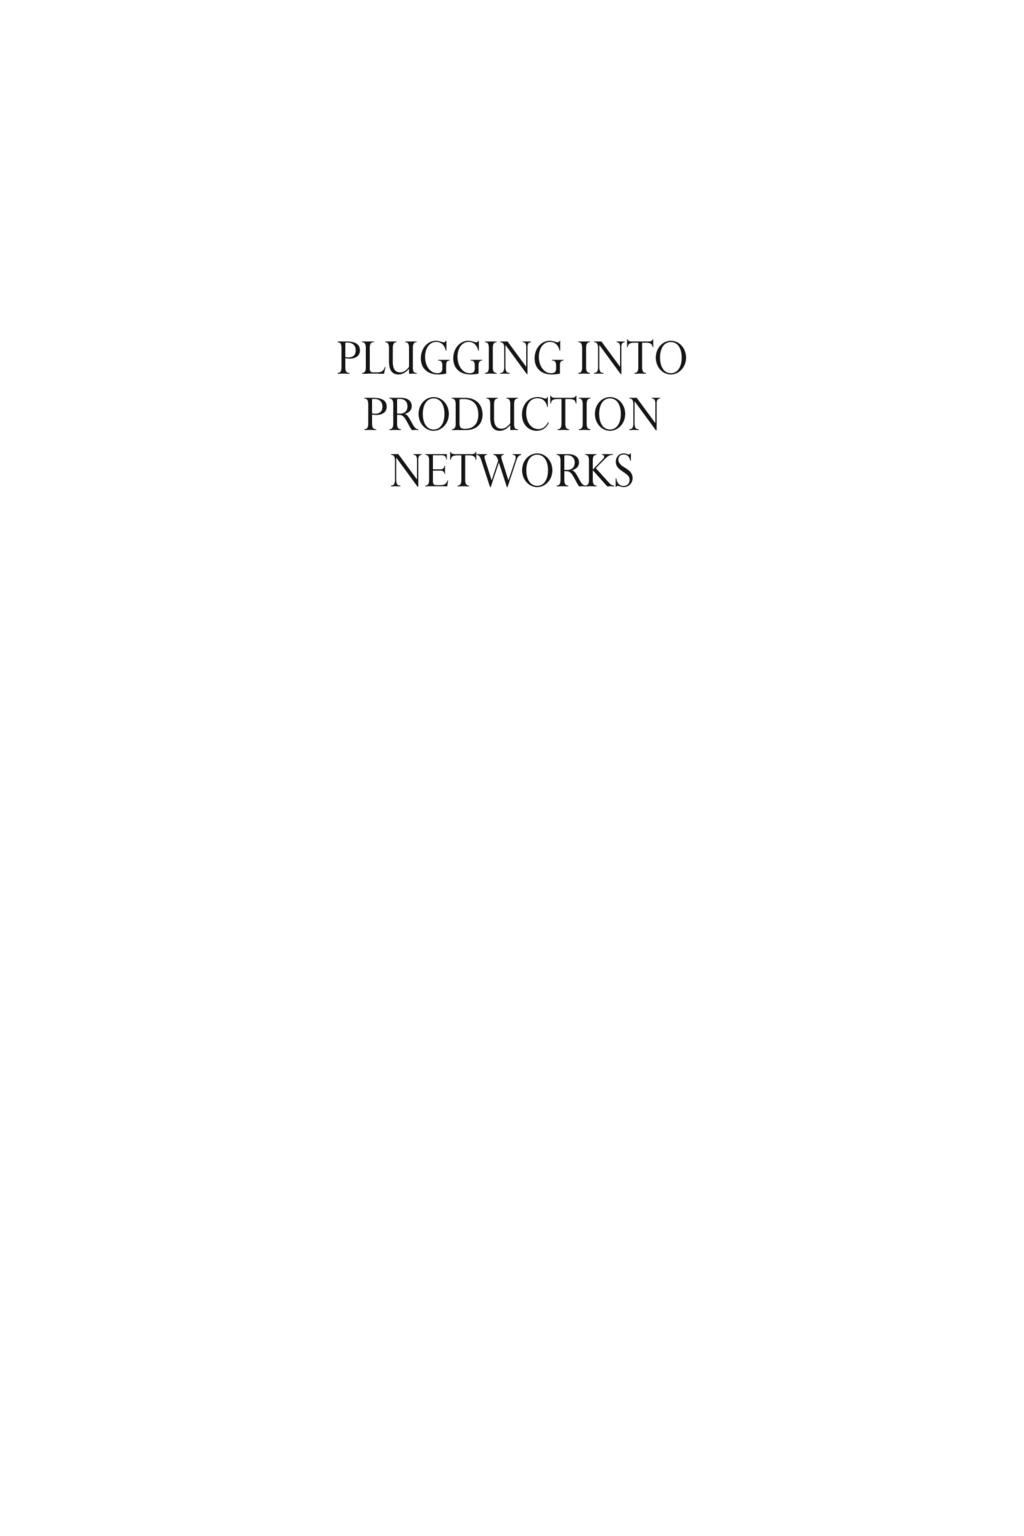 Reproduced from Plugging into Production Networks: Industrialization Strategy in Less Developed Southeast Asian Countries edited by Ikuo Kuroiwa (Singapore: Institute of Southeast Asian Studies,